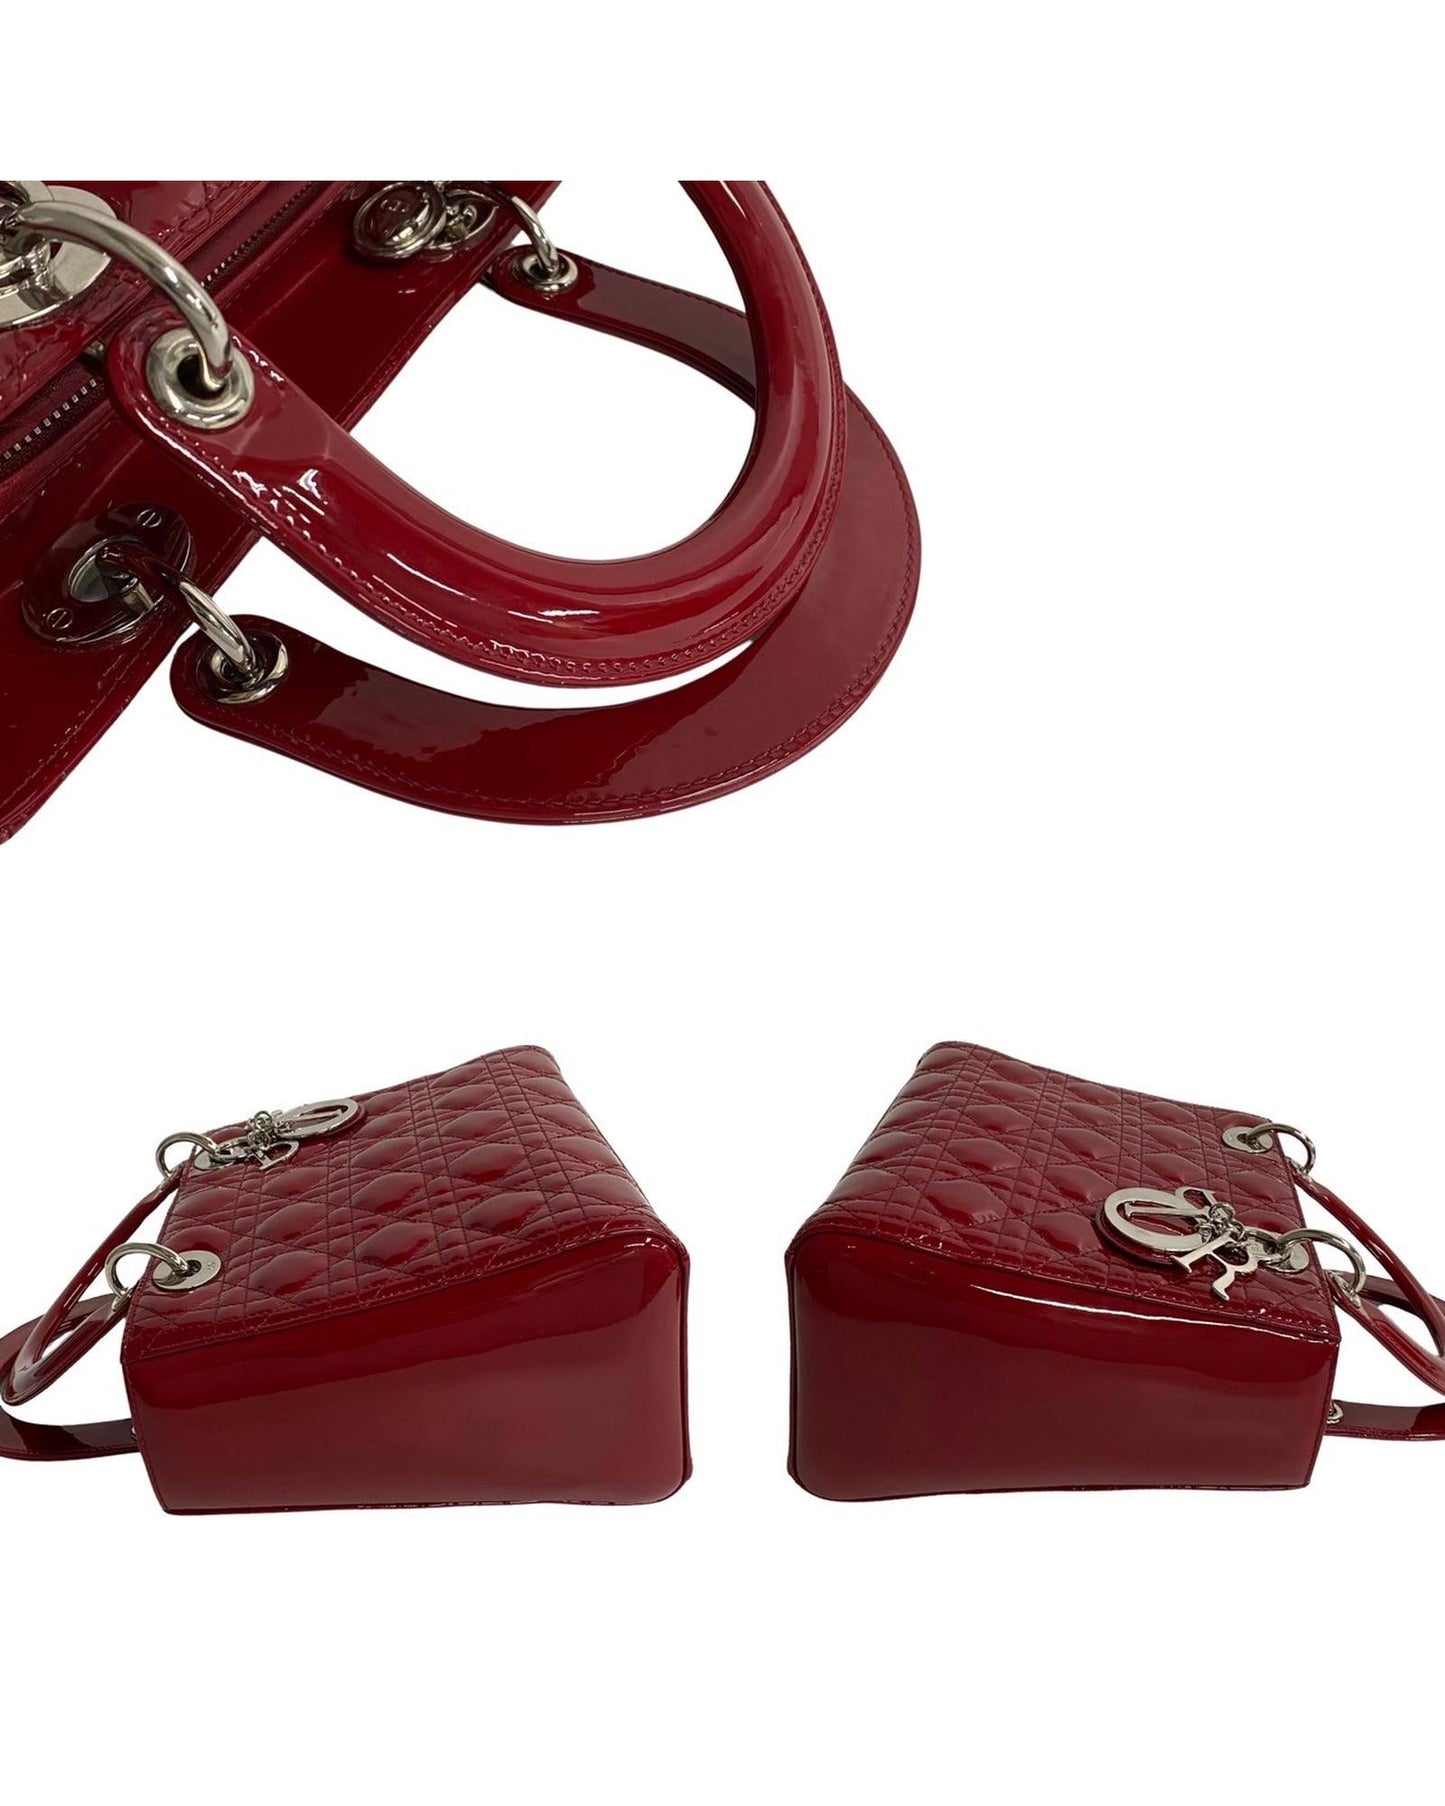 Dior Women's Medium Cannage Patent Lady Dior Bag in Red in Red